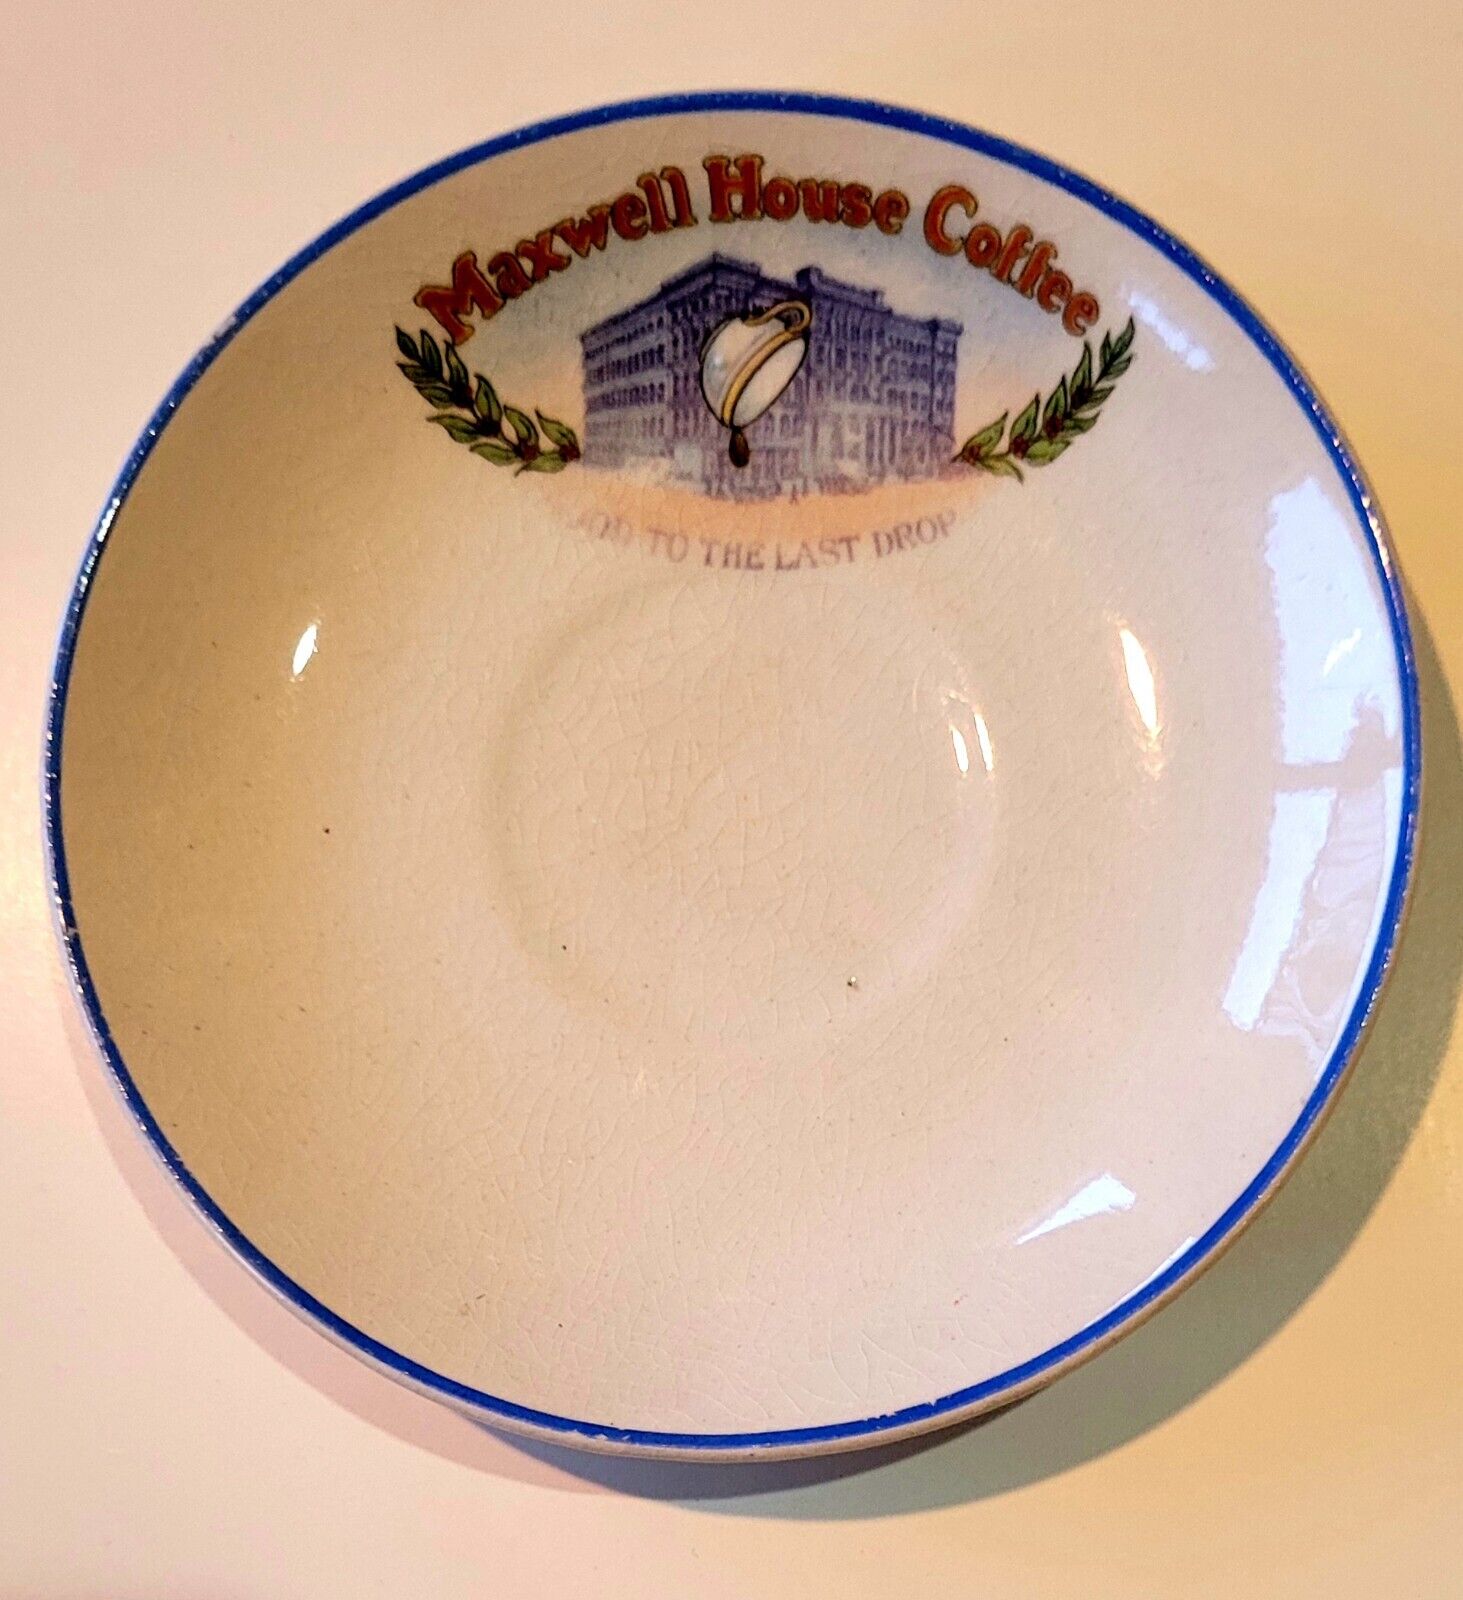 MAXWELL HOUSE COFFEE ADVERTISING CHINA PLATE